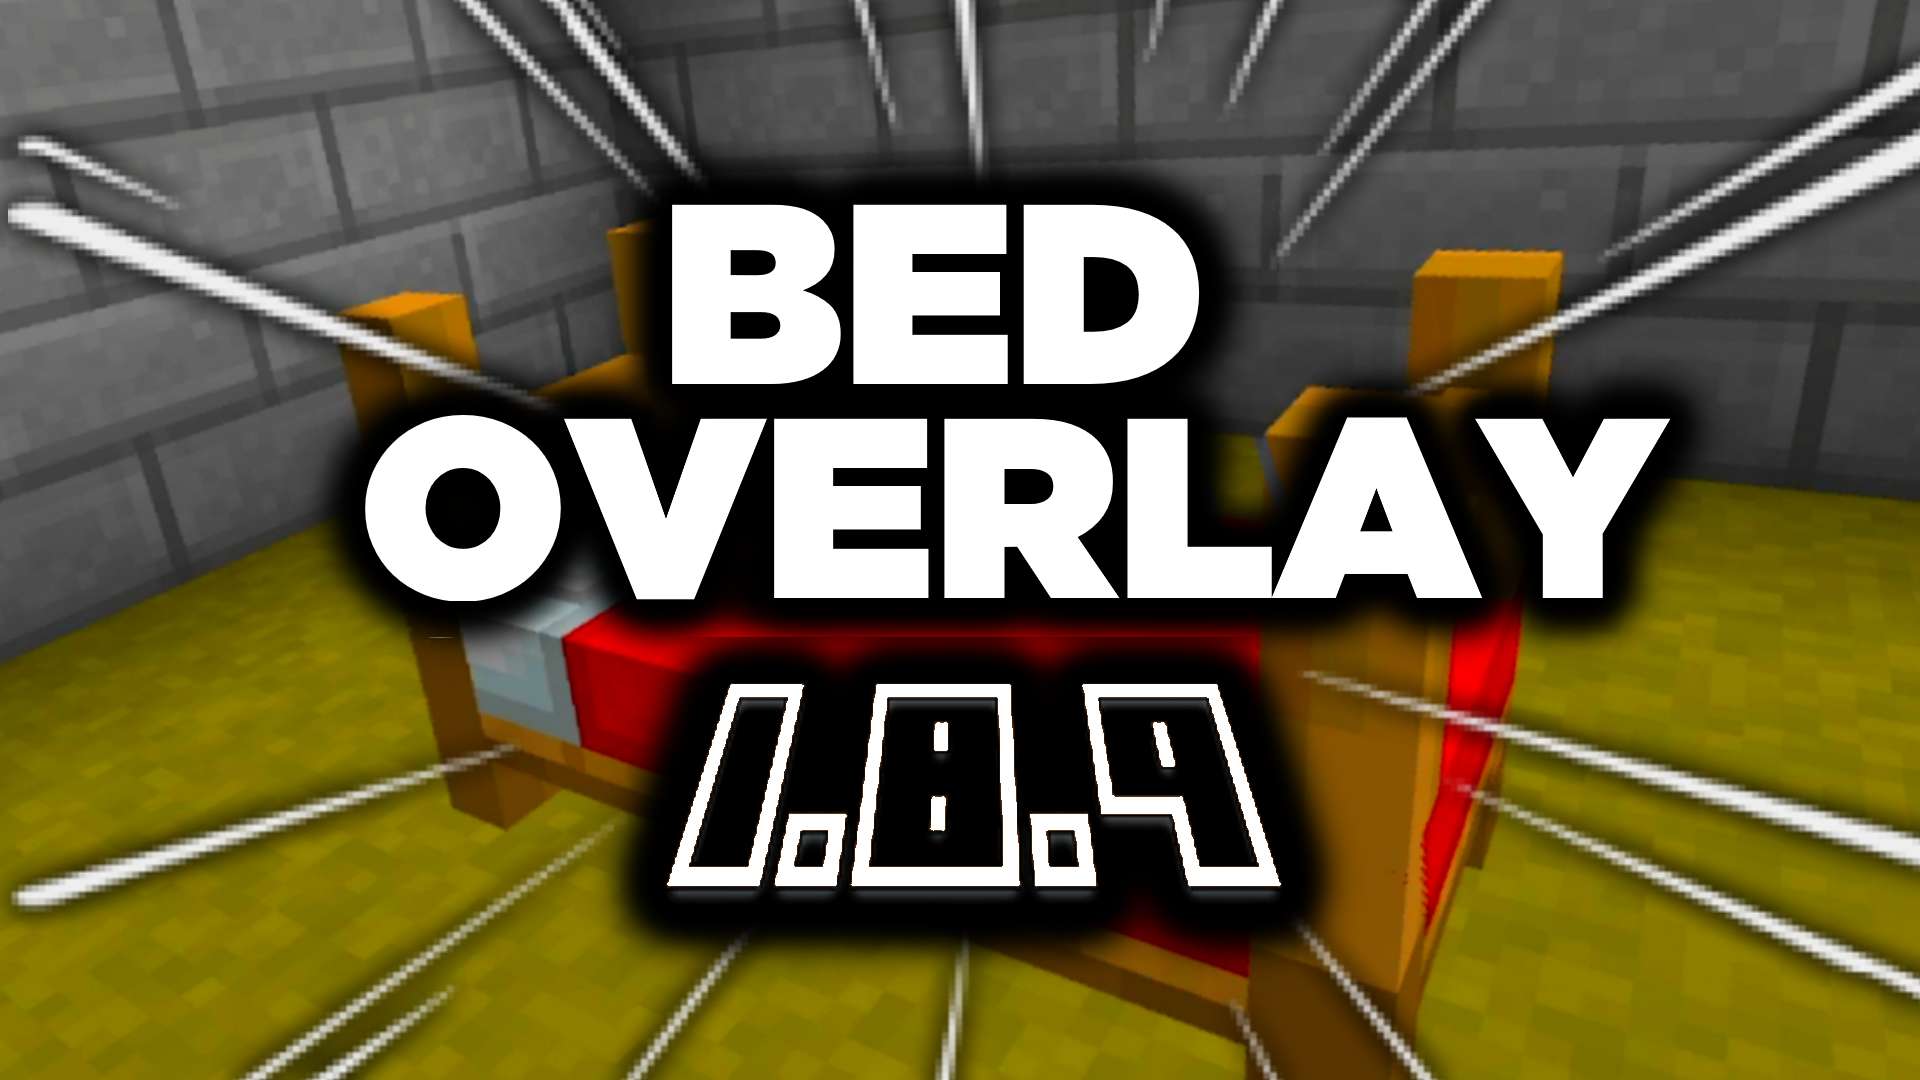 Bed overlay 16x by desat on PvPRP